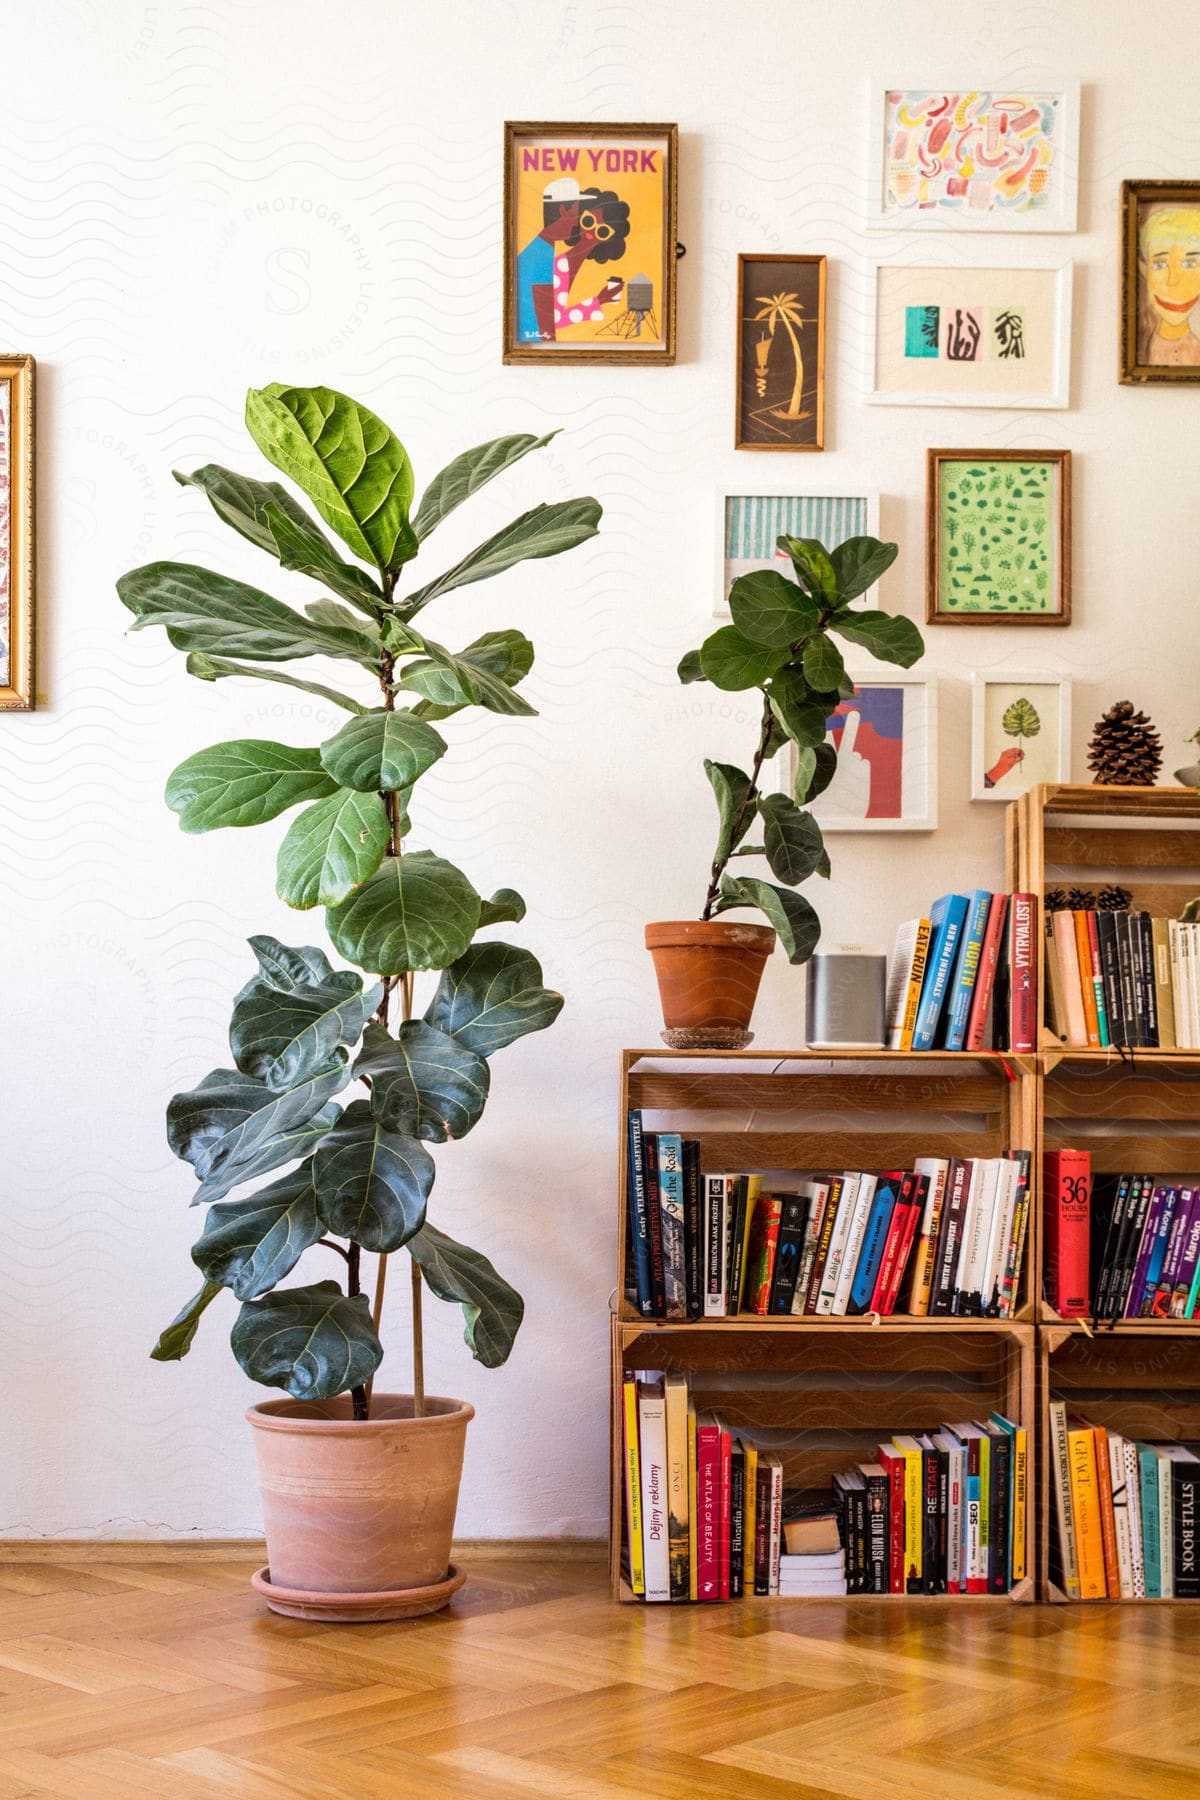 A room with bookcases painting and plants